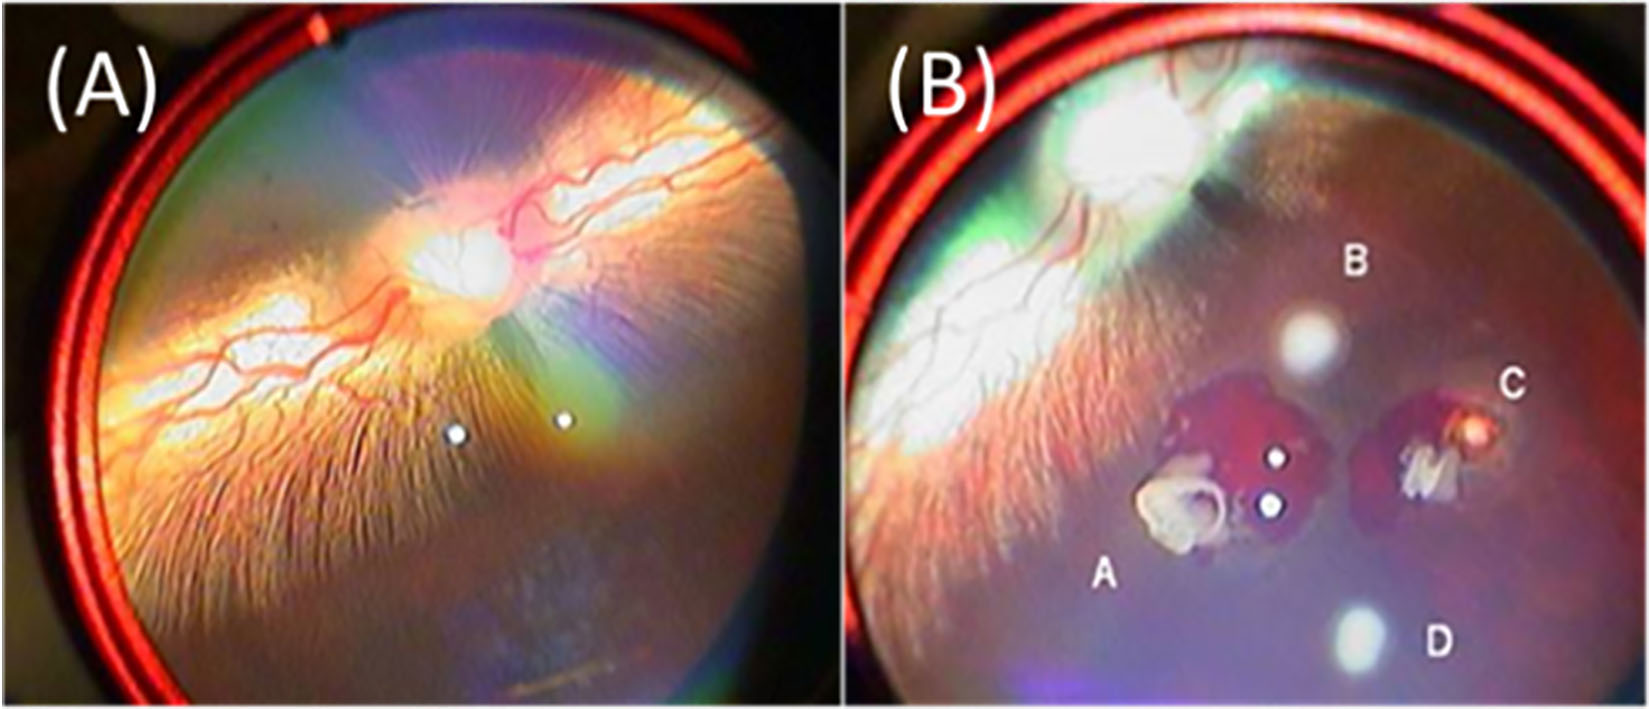 Fundus images of the Rex rabbit: (A) before laser photocoagulation and (B) after laser photocoagulation. Four spots were created by laser light.